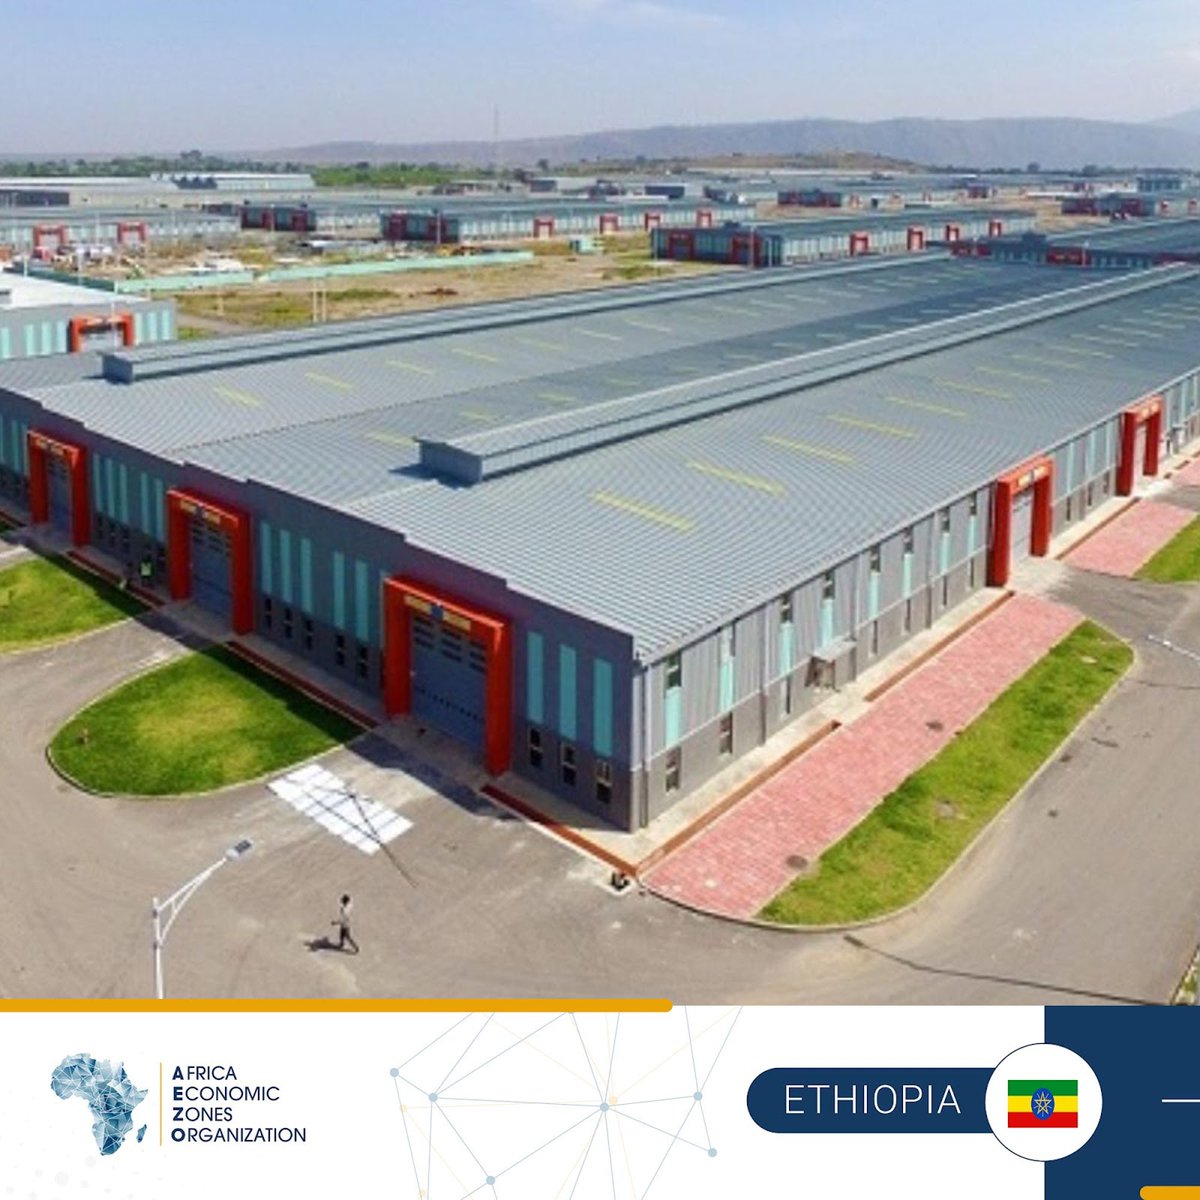 #Ethiopia - Addis Ababa to have Special Economic Zone By 2022
Read More: 
allafrica.com/stories/202107… 

#Africa #freezone #freetradezone #EPZ #specialeconomiczone #SEZ #industrial #industrialpark #investment #infrastructure #growth #development #Economicgrowth #Africawewant